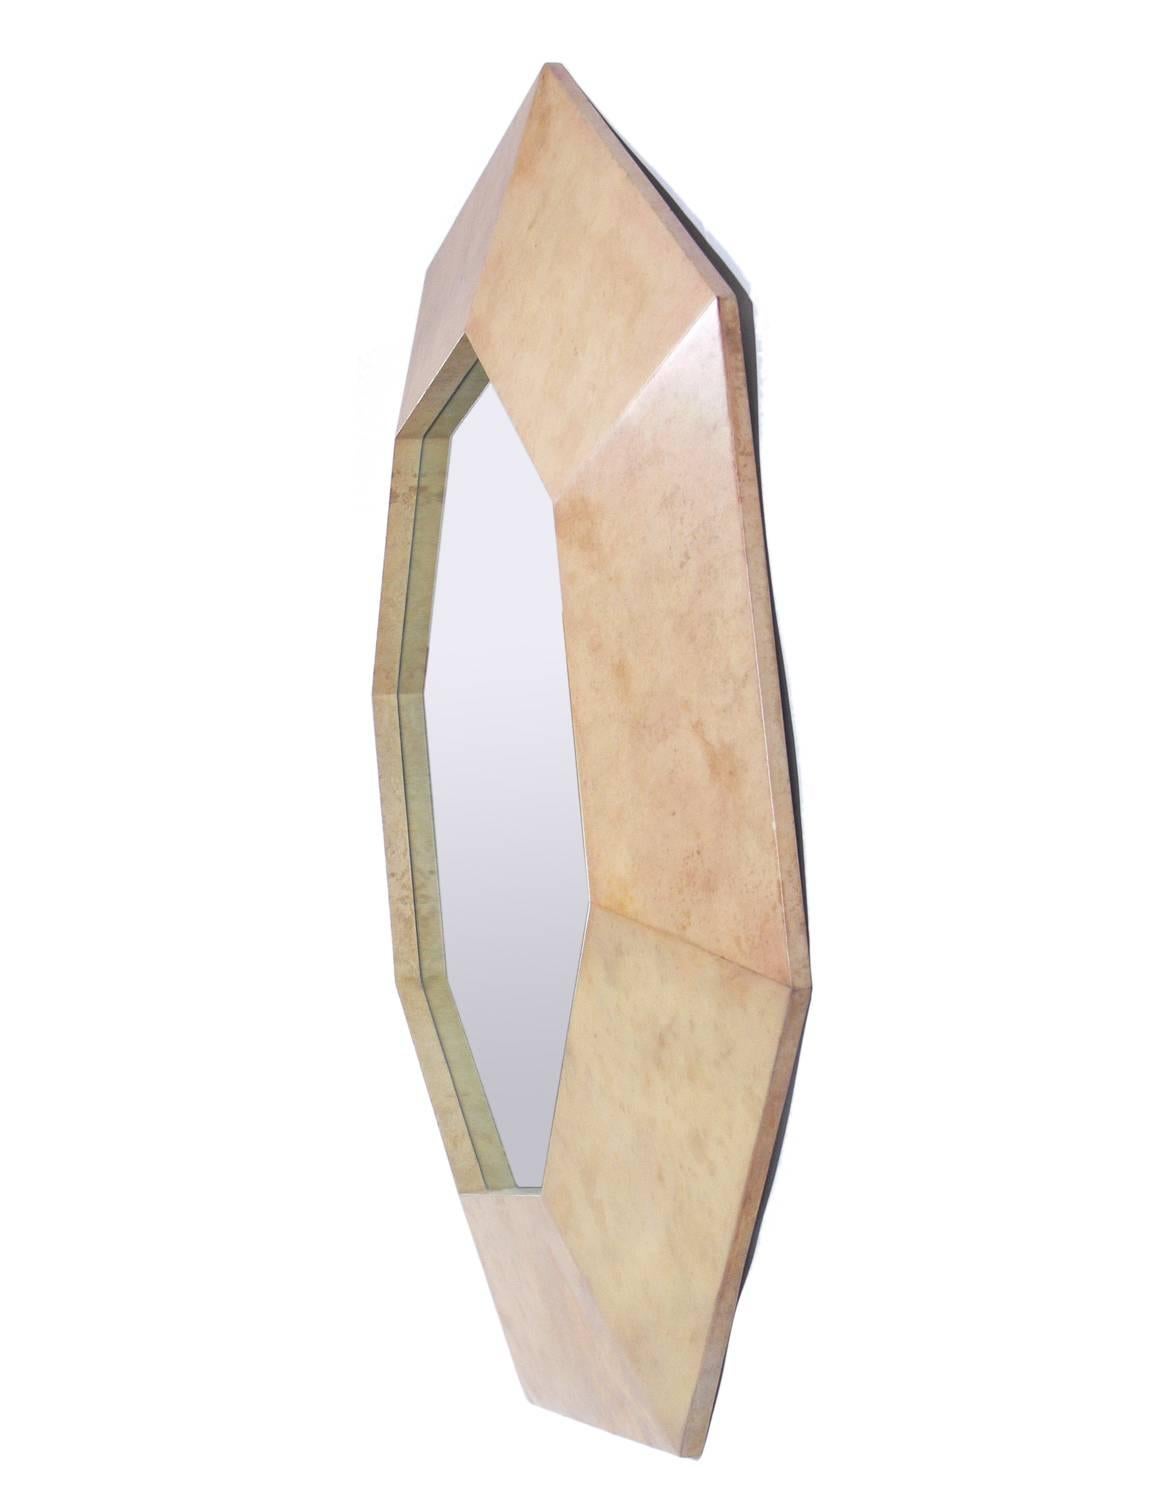 Octagonal parchment mirror, in the manner of Karl Springer, American, circa 1970s. Retains warm original patina.